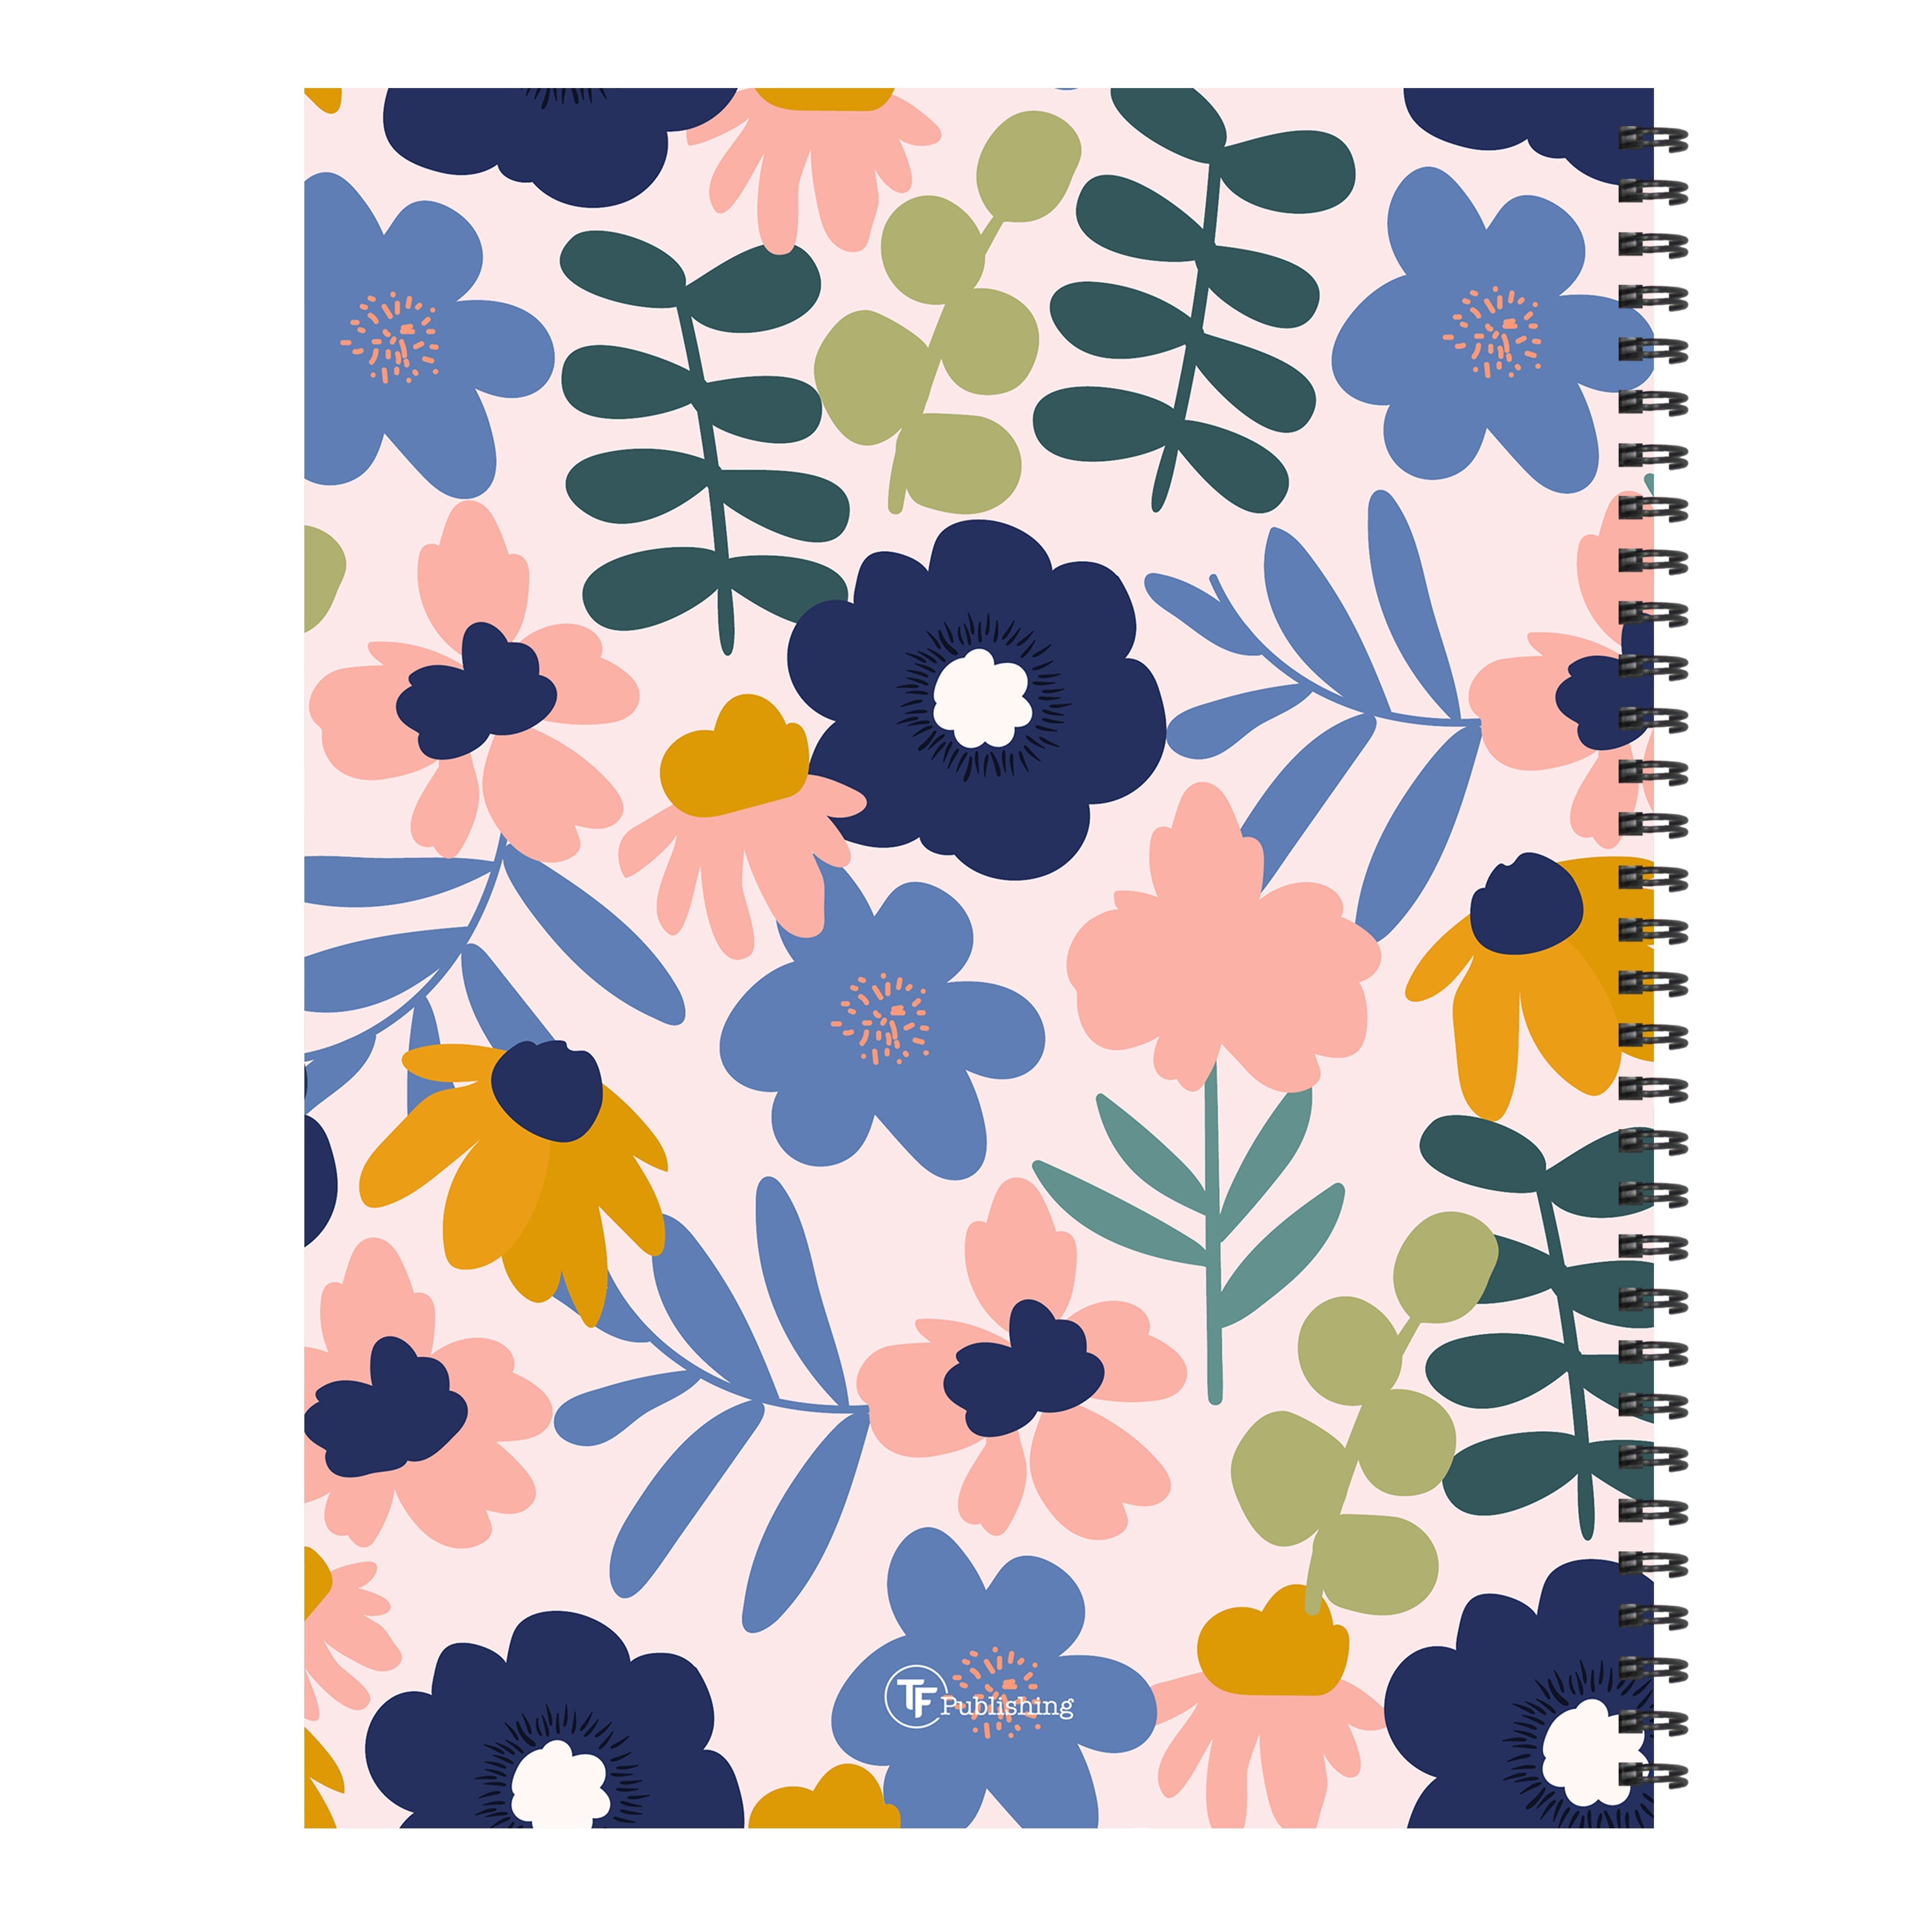 July 2024 - June 2025 Pink Petals Teacher and Home School Lesson Planning Book - Large Weekly & Monthly Academic Year Diary/Planner